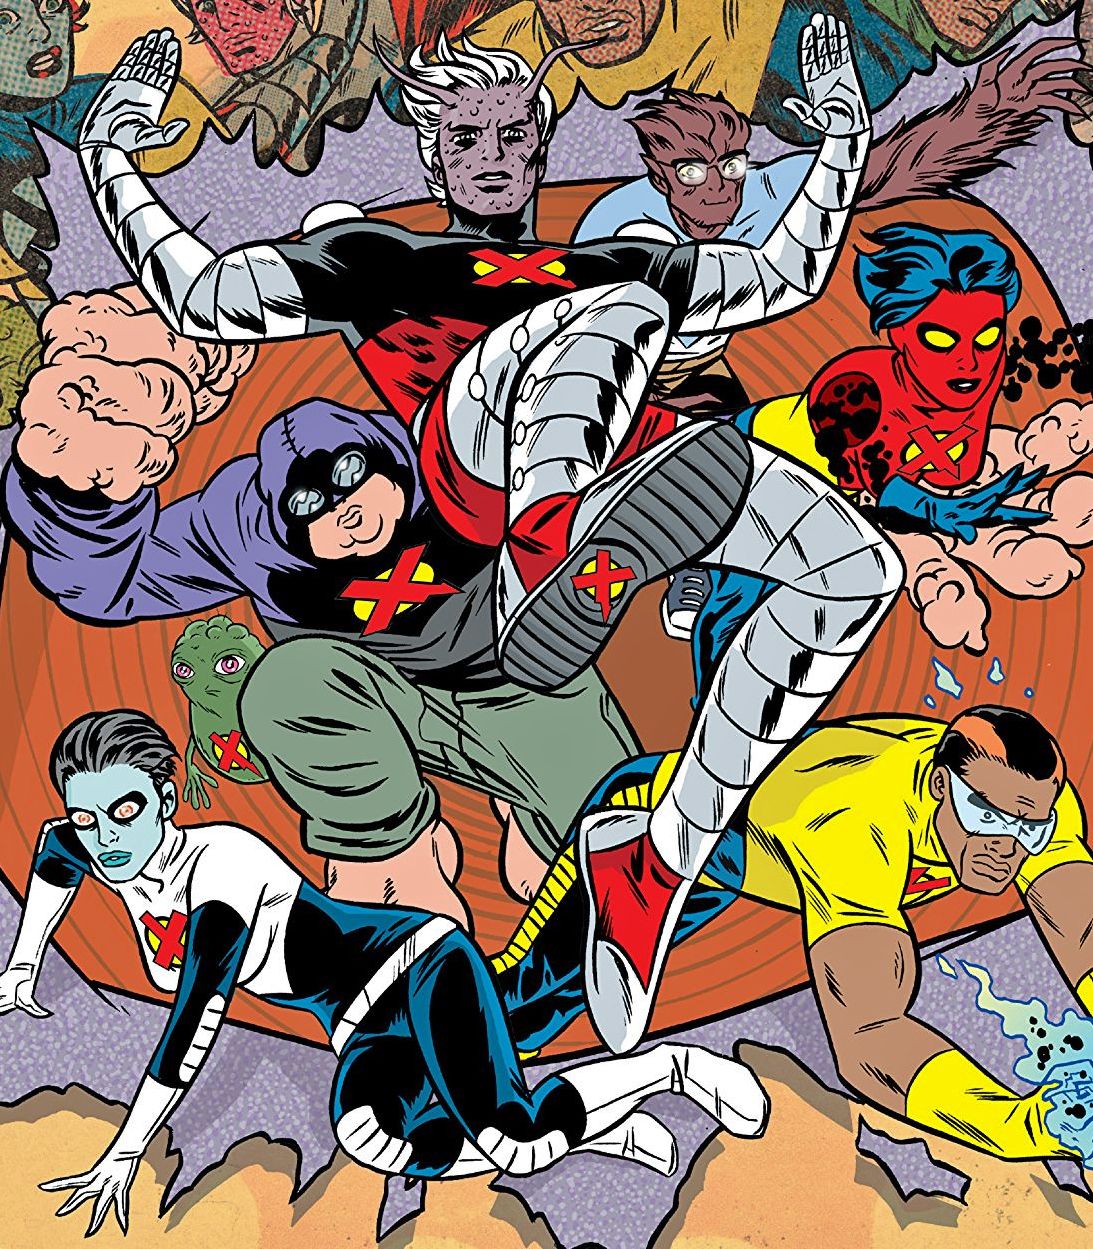 X-Statix #1 by Mike Allred